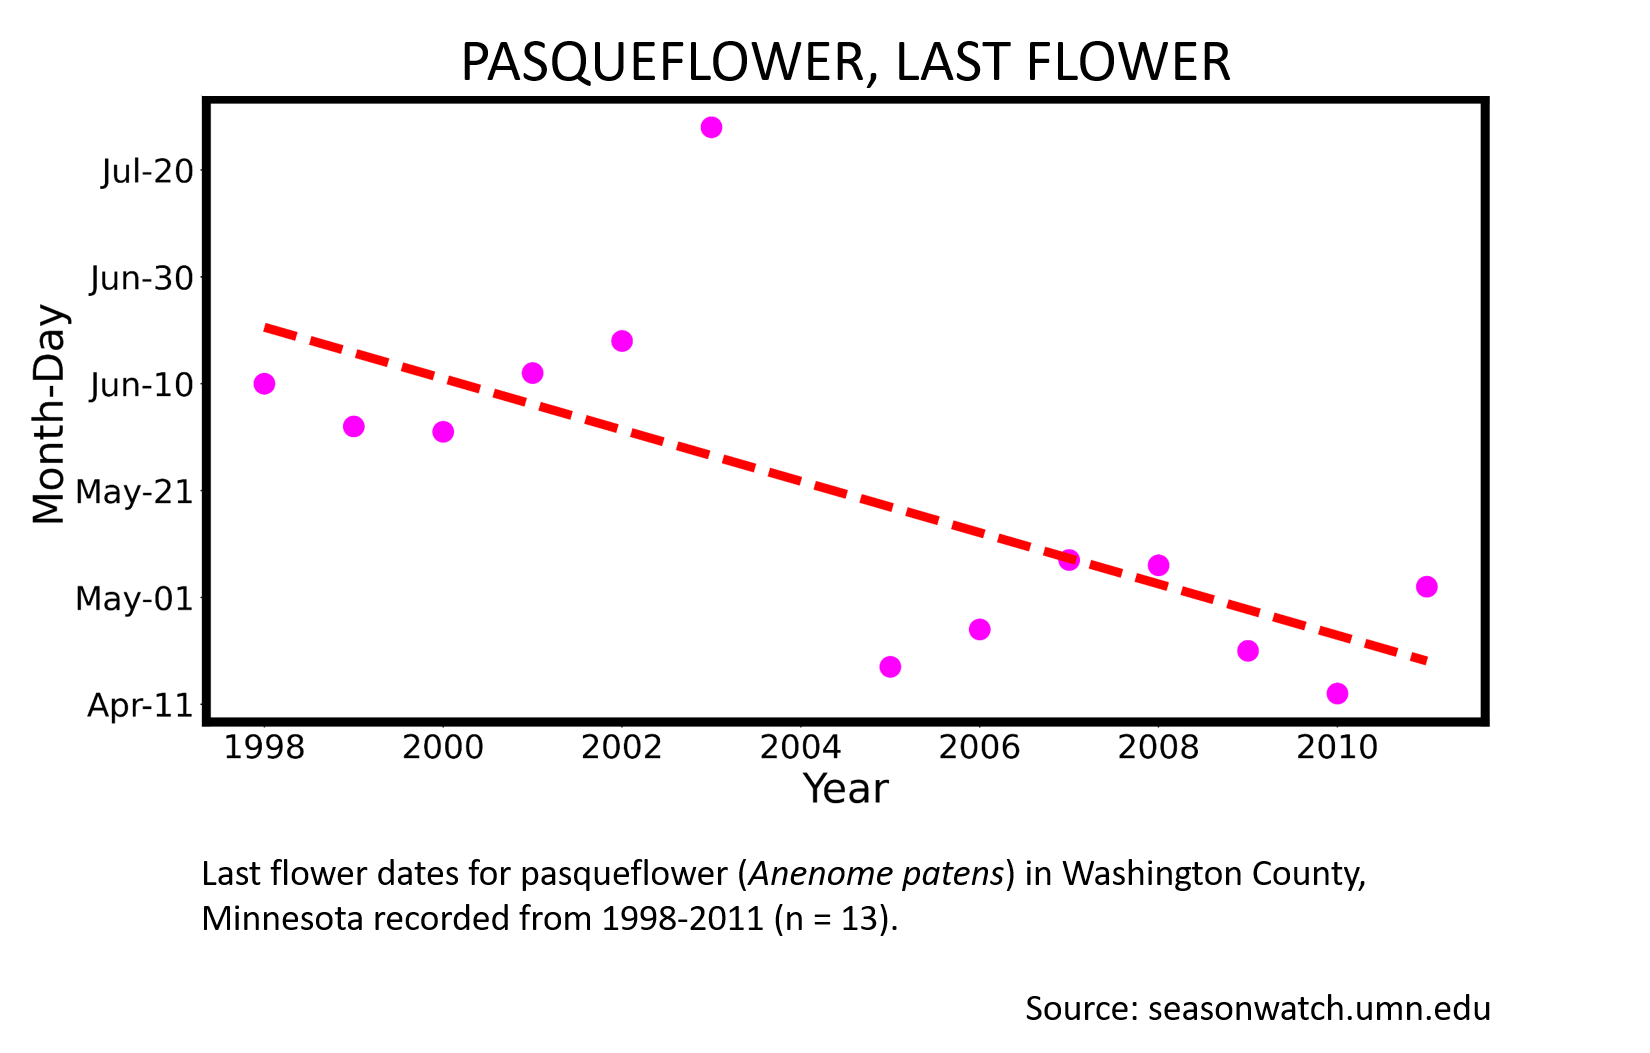 Scatterplot showing pasqueflower phenology observations in Washington County, Minnesota